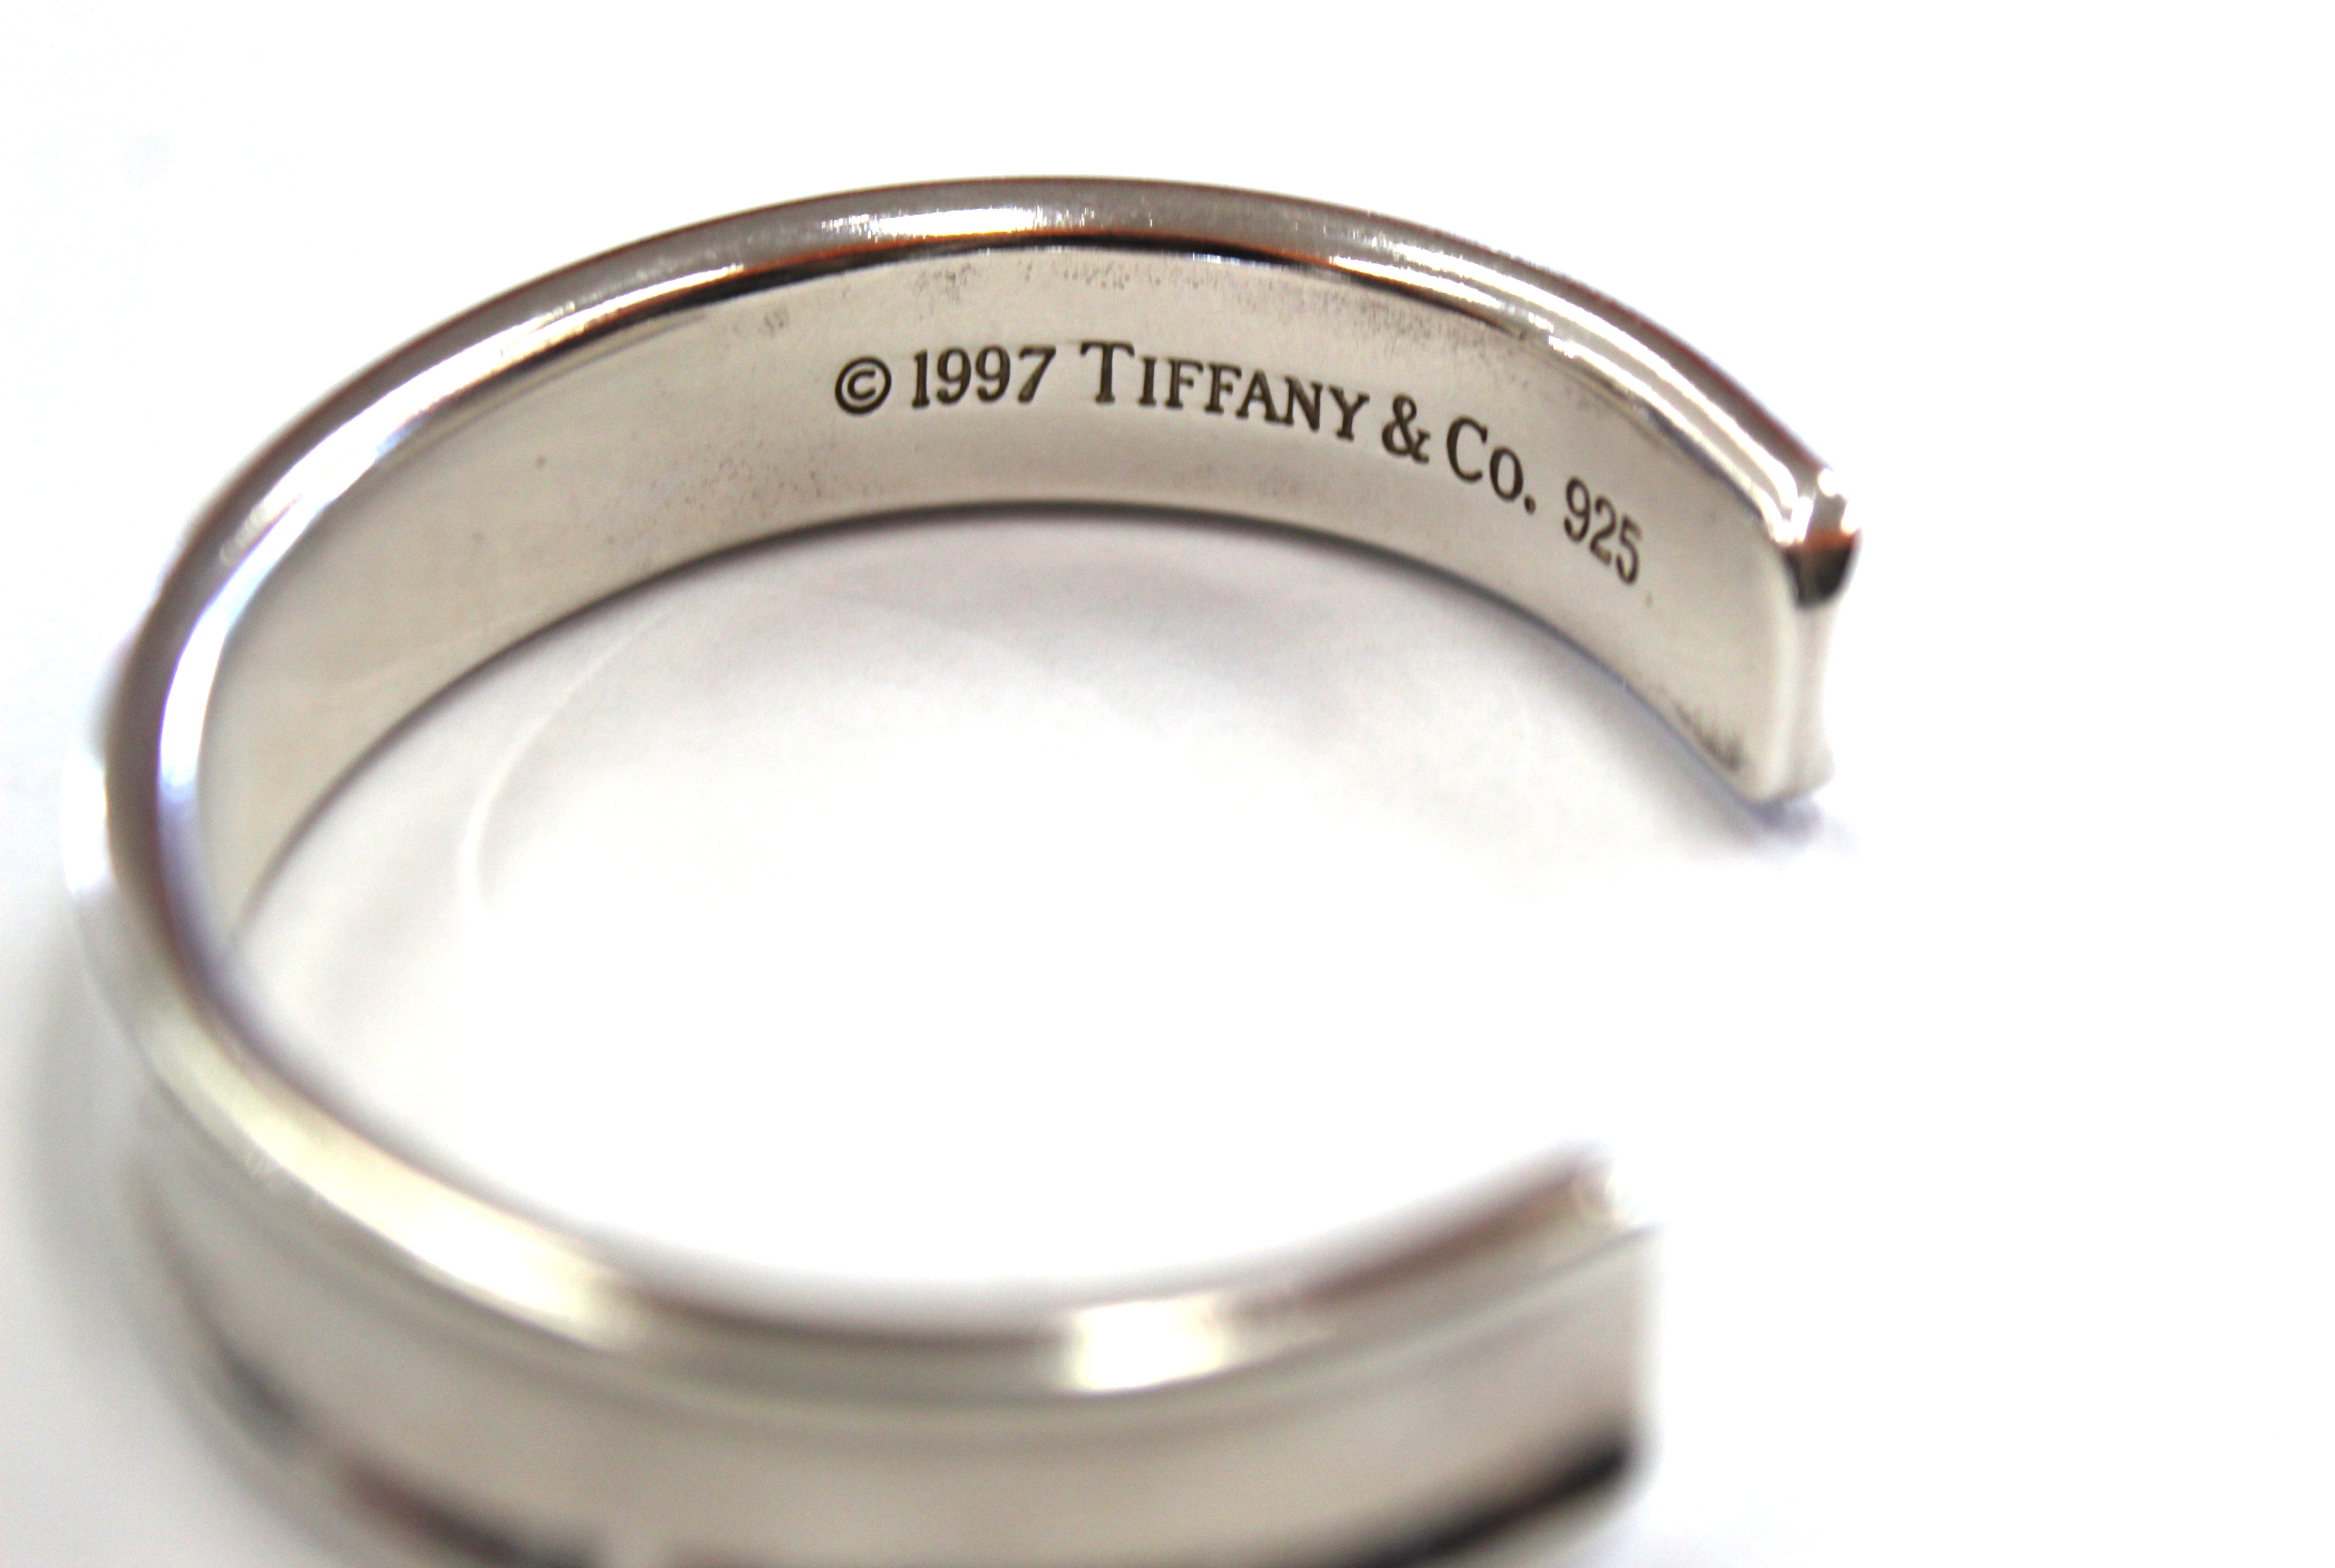 Authentic Tiffany & Co. Sterling Silver 1837 Cuff Bracelet Bangle